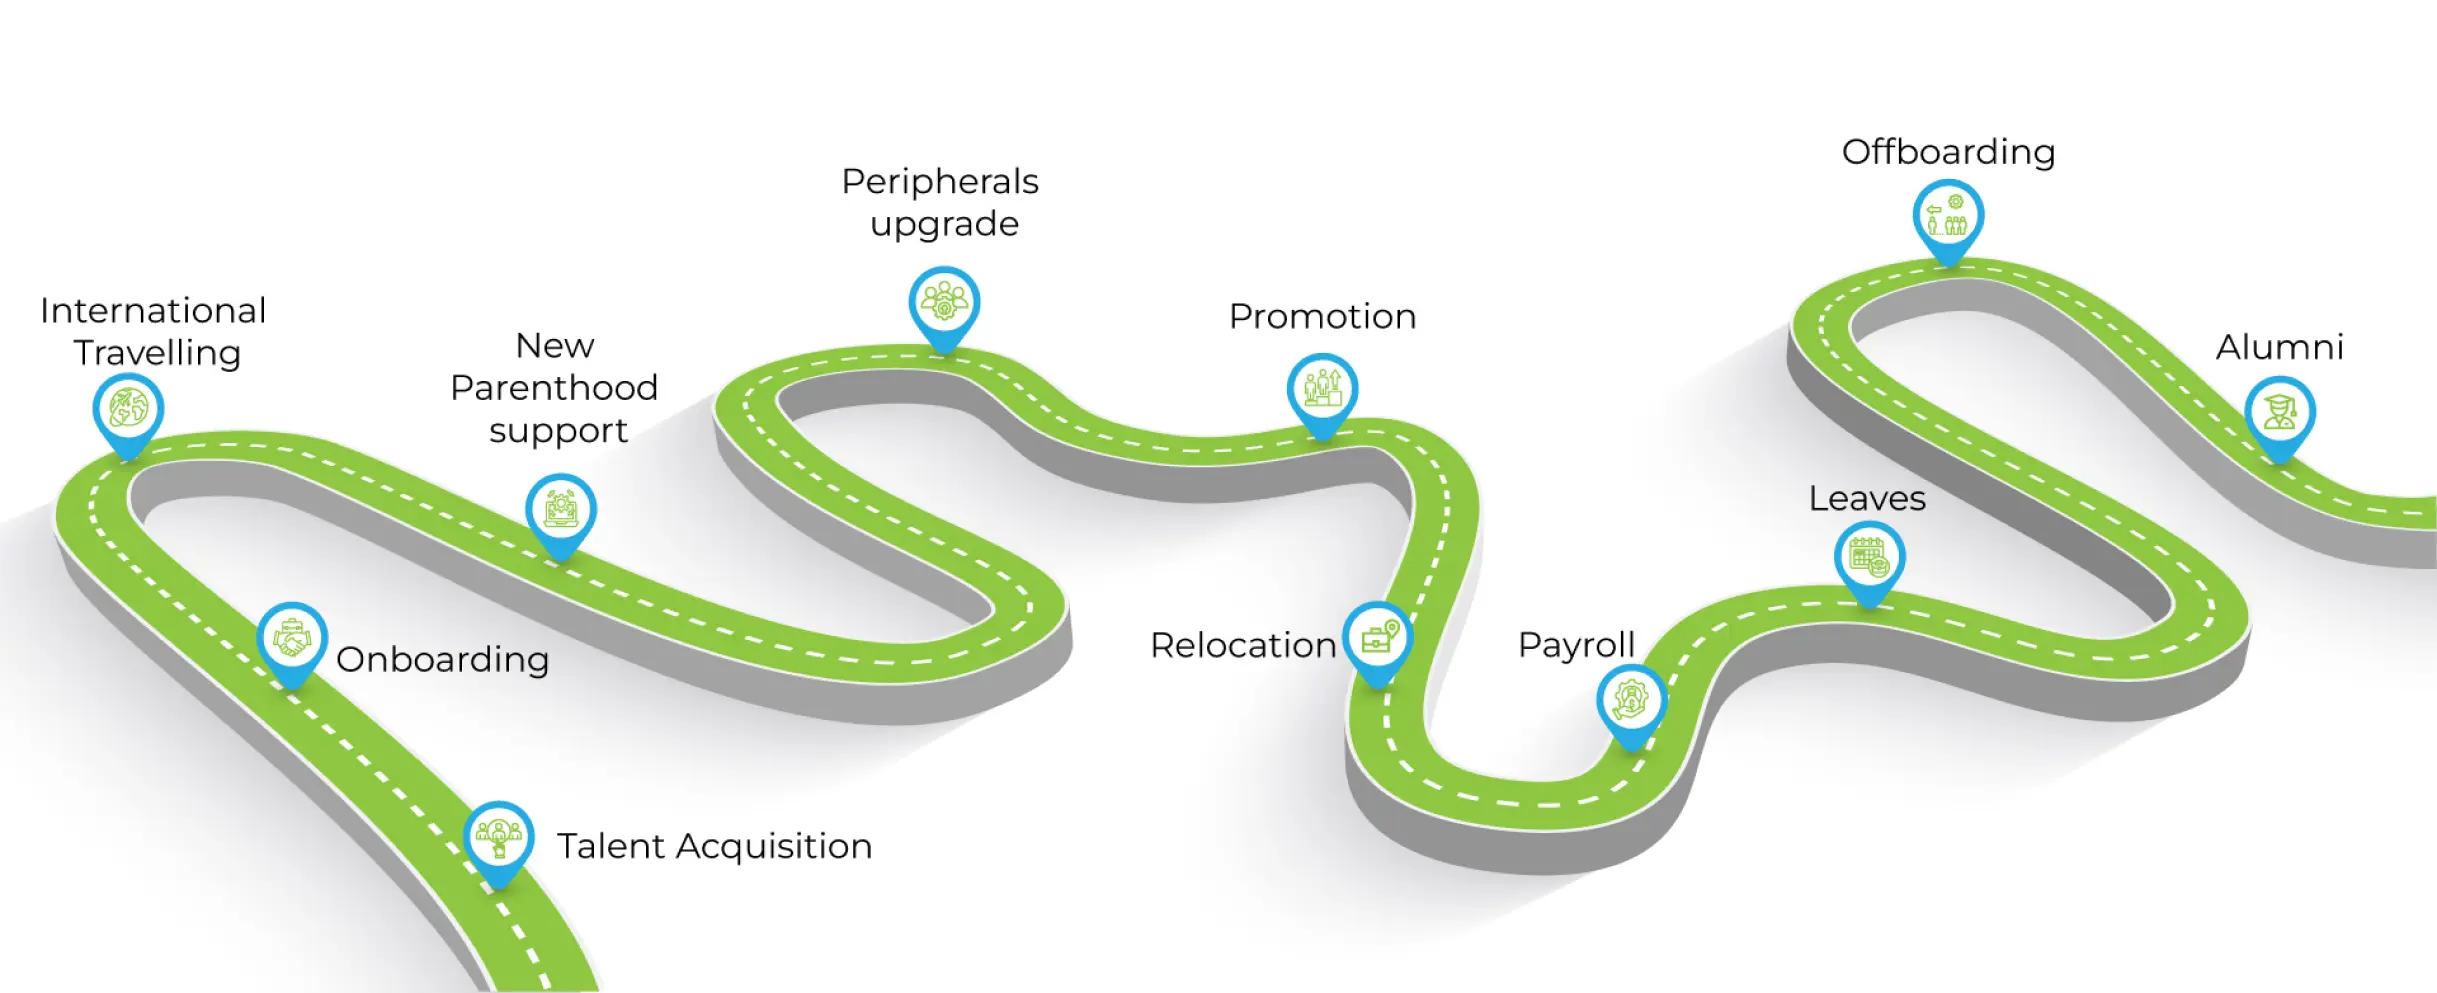 Infographic showing the stages of Employee journey with ServcieNow HRSD module